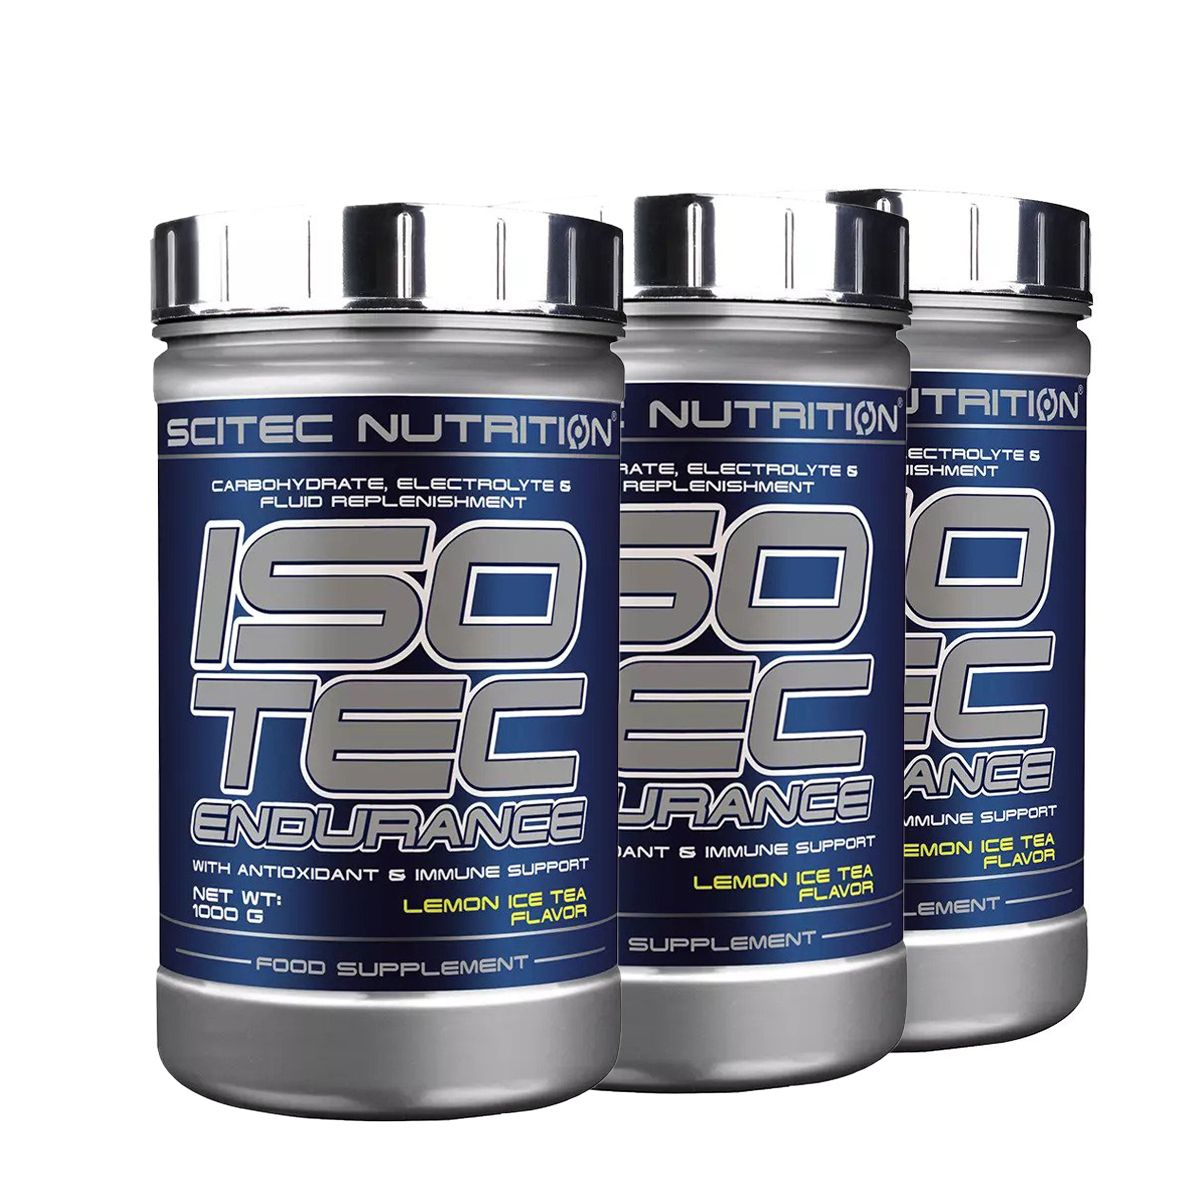 SCITEC NUTRITION - ISOTEC - CARBOHYDRATE & FLUID REPLENISHMENT FORMULA - 3 x 1000 G (HG)